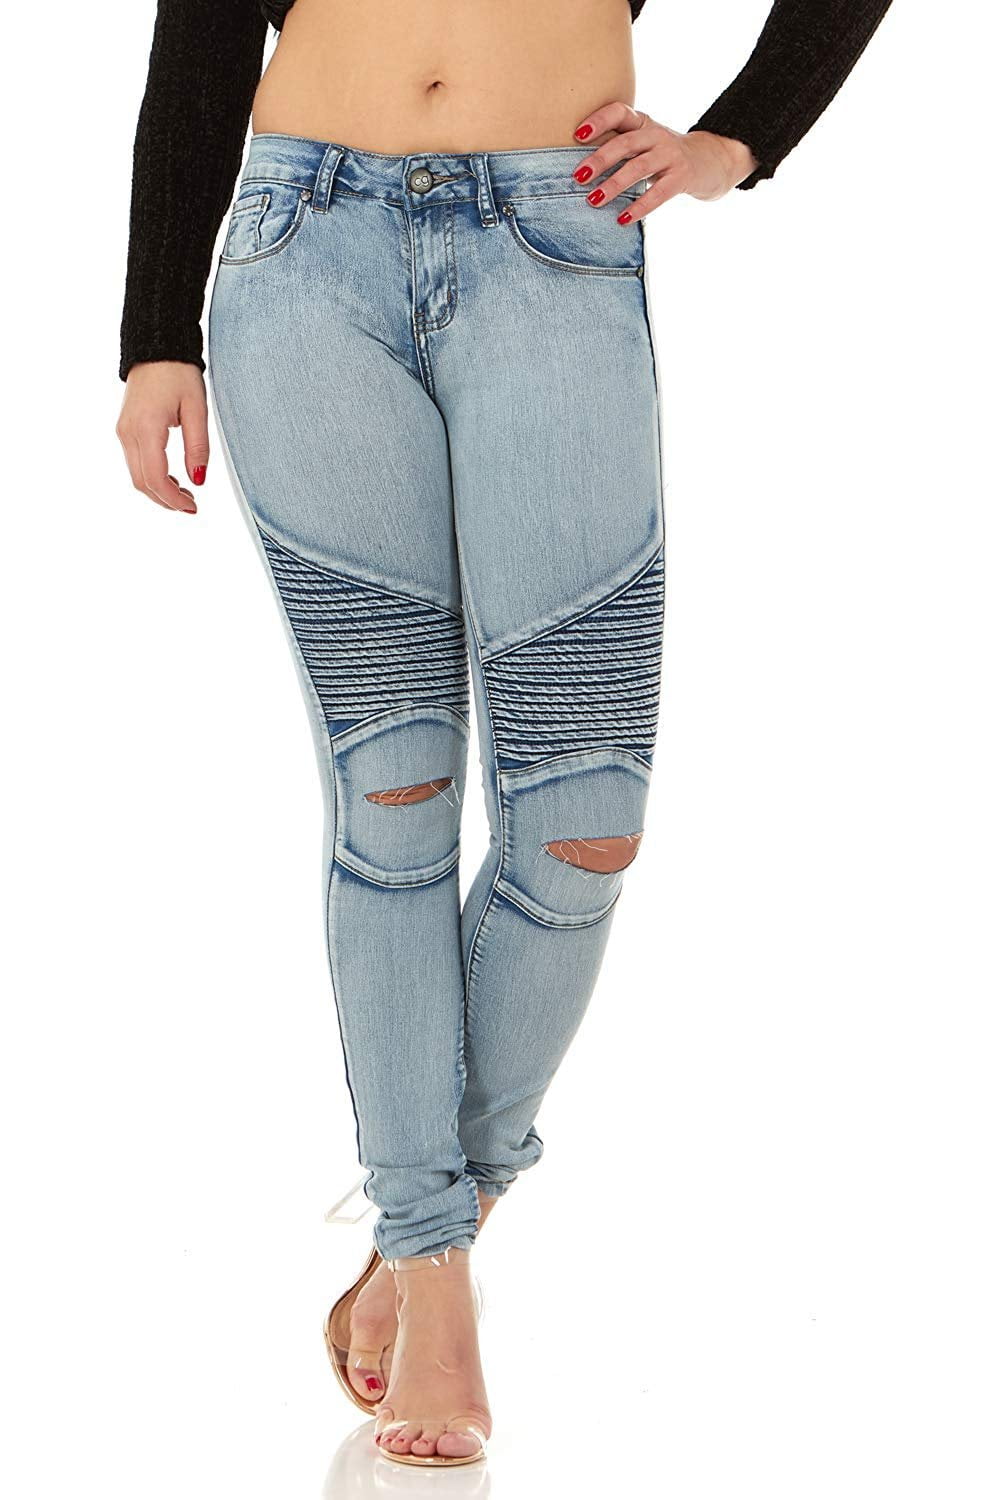 knee cut jeans for girls